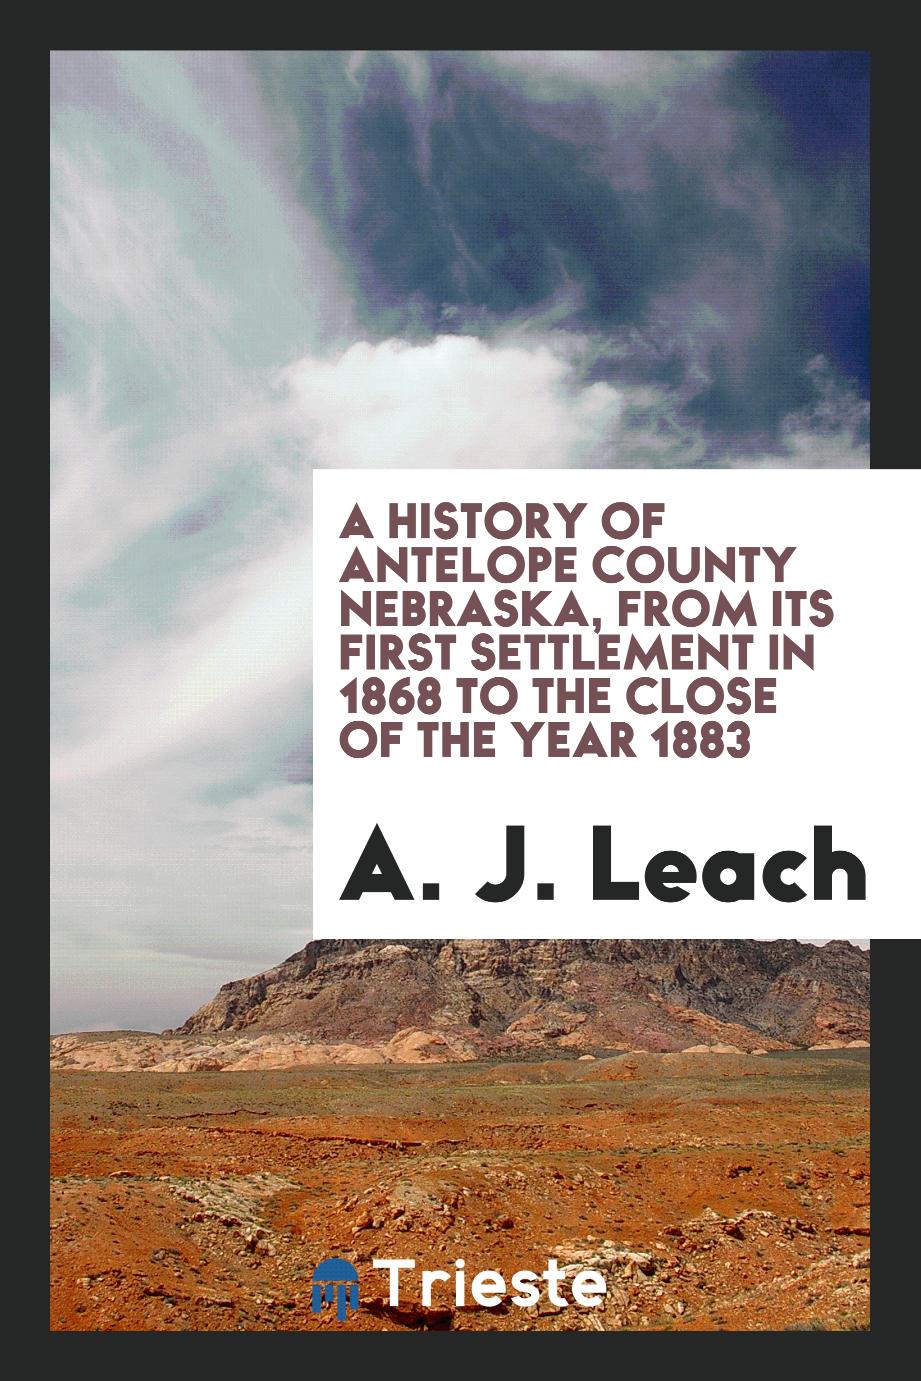 A history of Antelope County Nebraska, from its first settlement in 1868 to the close of the year 1883